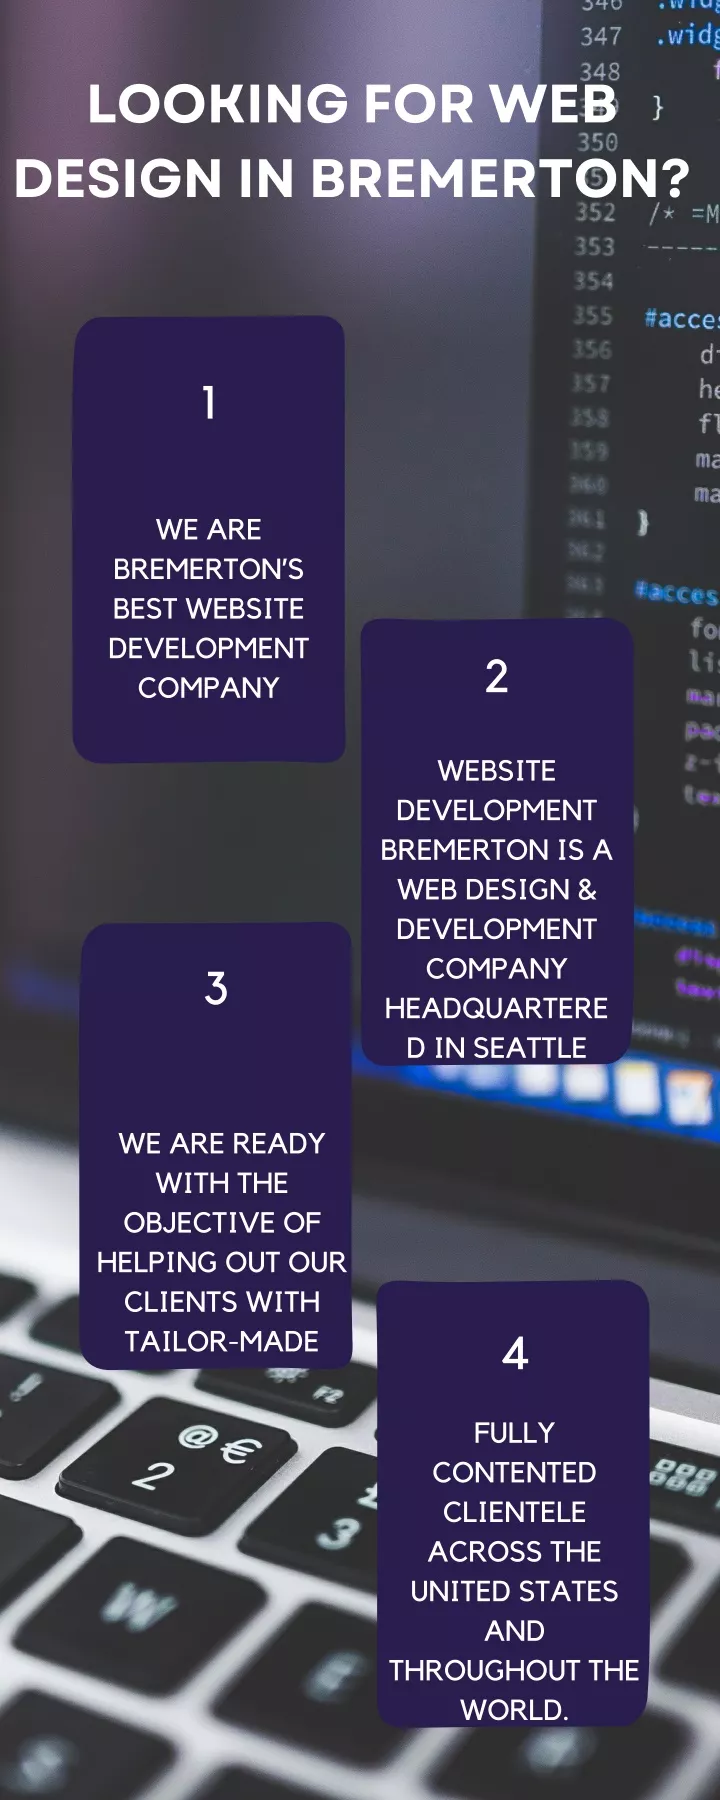 looking for web design in bremerton